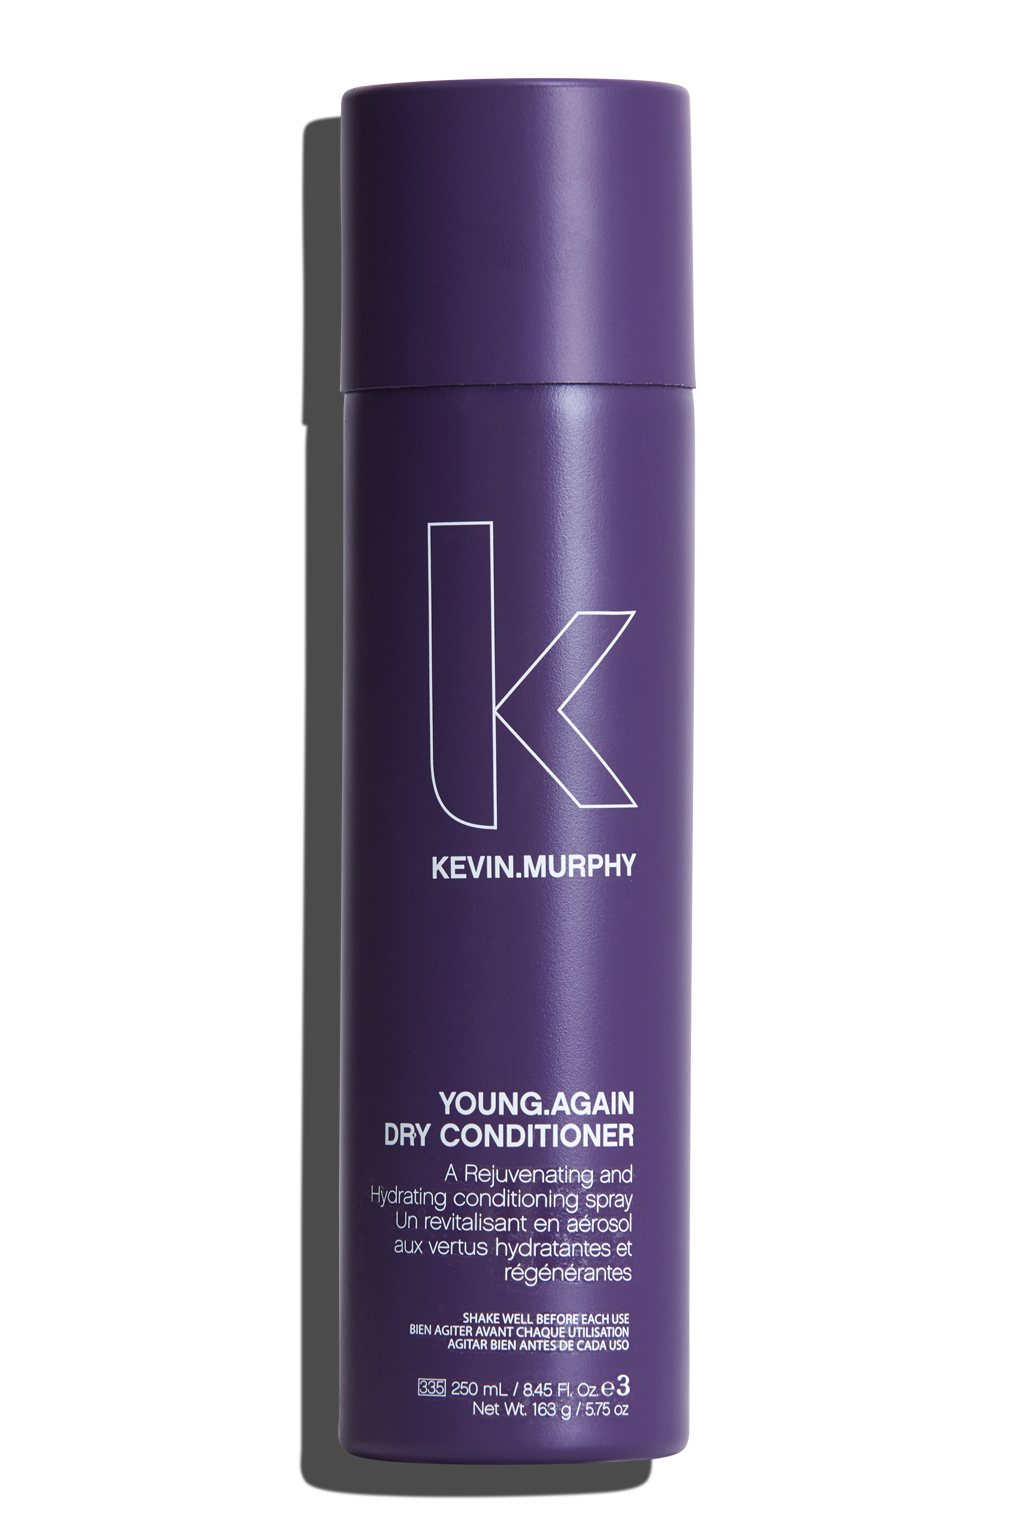 YOUNG AGAIN DRY CONDITIONER